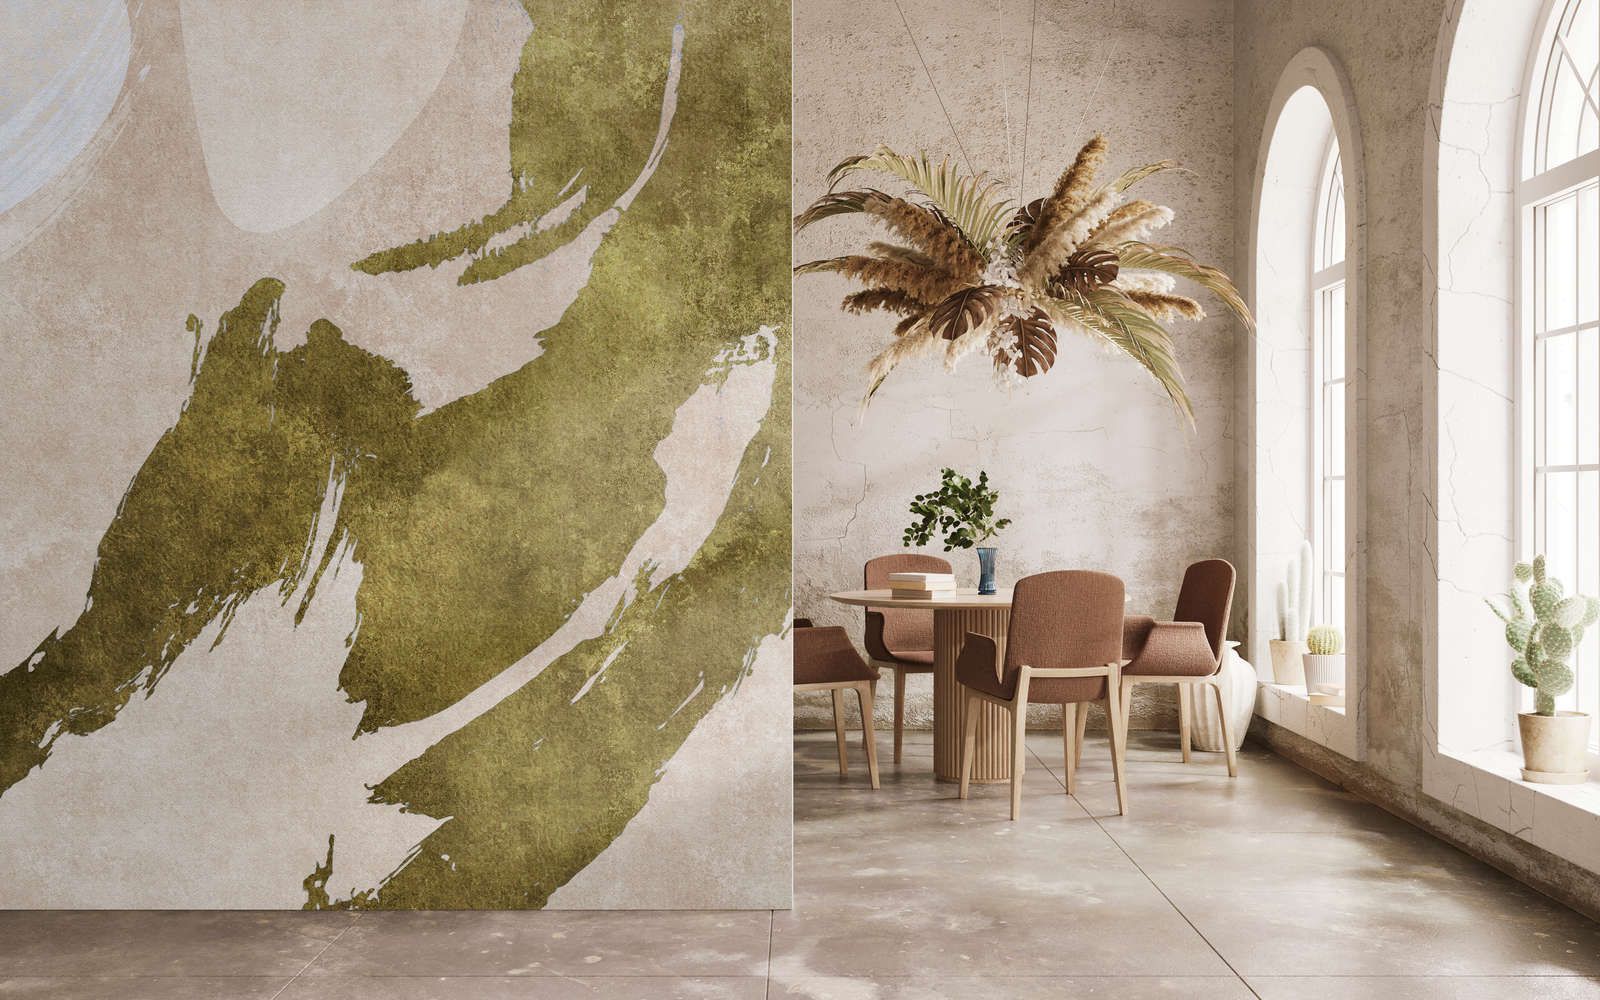             Photo wallpaper »temu« - Brushstrokes with abstract design - Green, cream with vintage plaster texture | matt, smooth non-woven
        